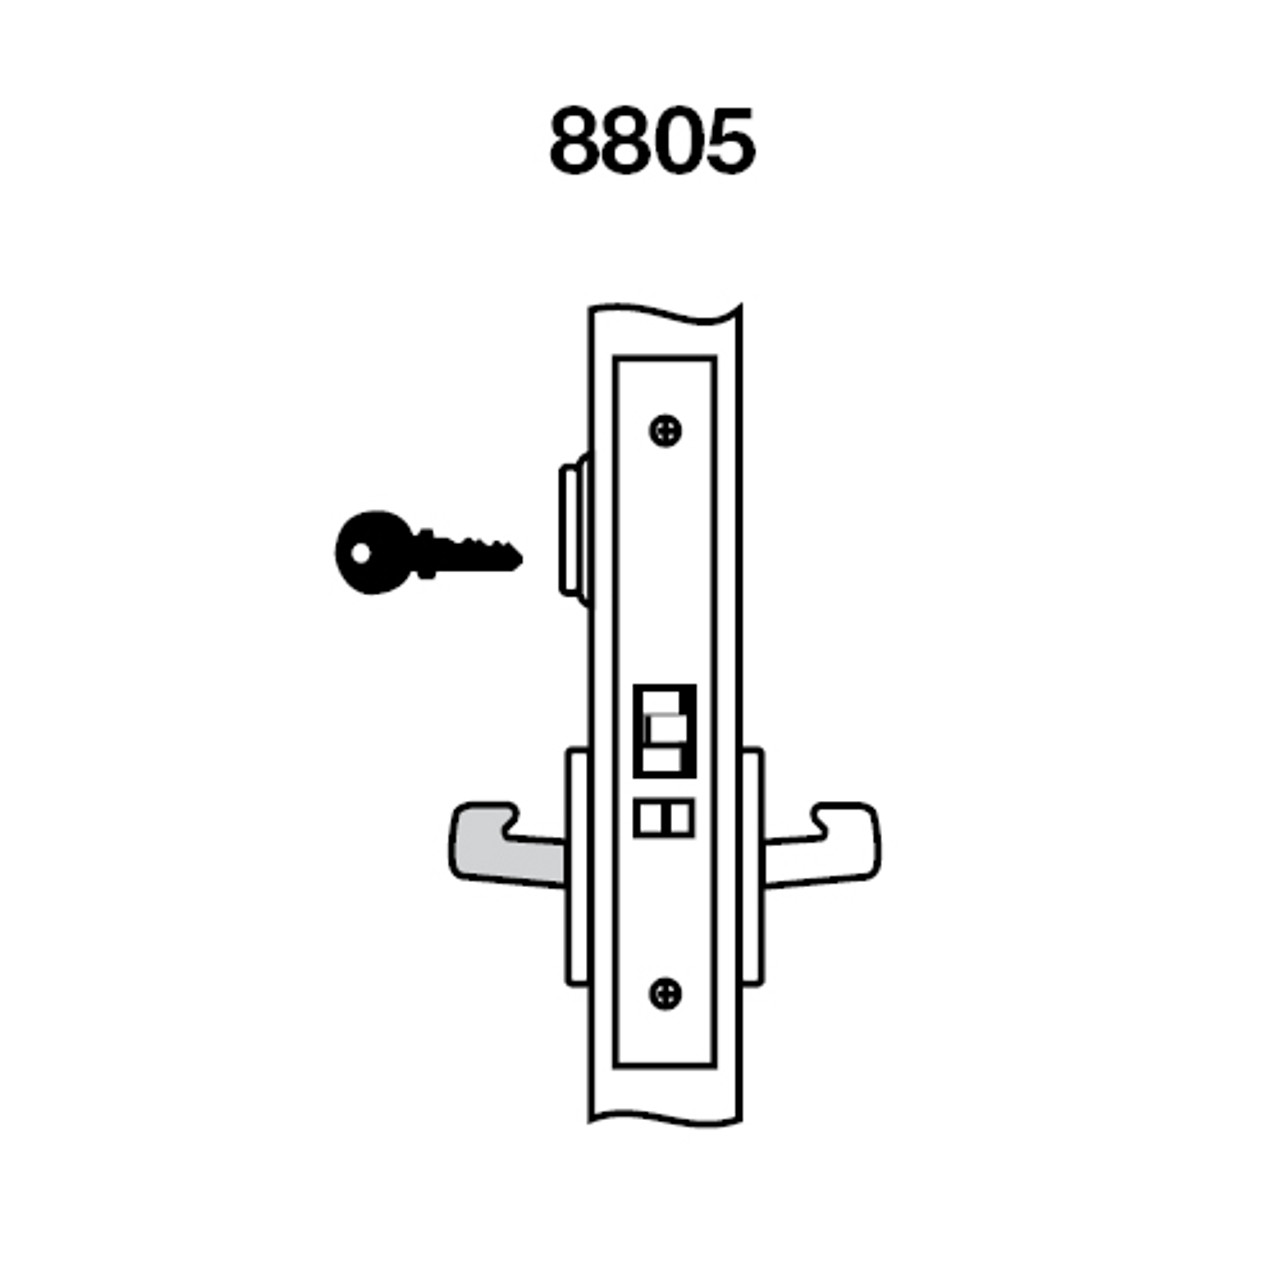 PBR8805FL-605 Yale 8800FL Series Single Cylinder Mortise Storeroom/Closet Locks with Pacific Beach Lever in Bright Brass